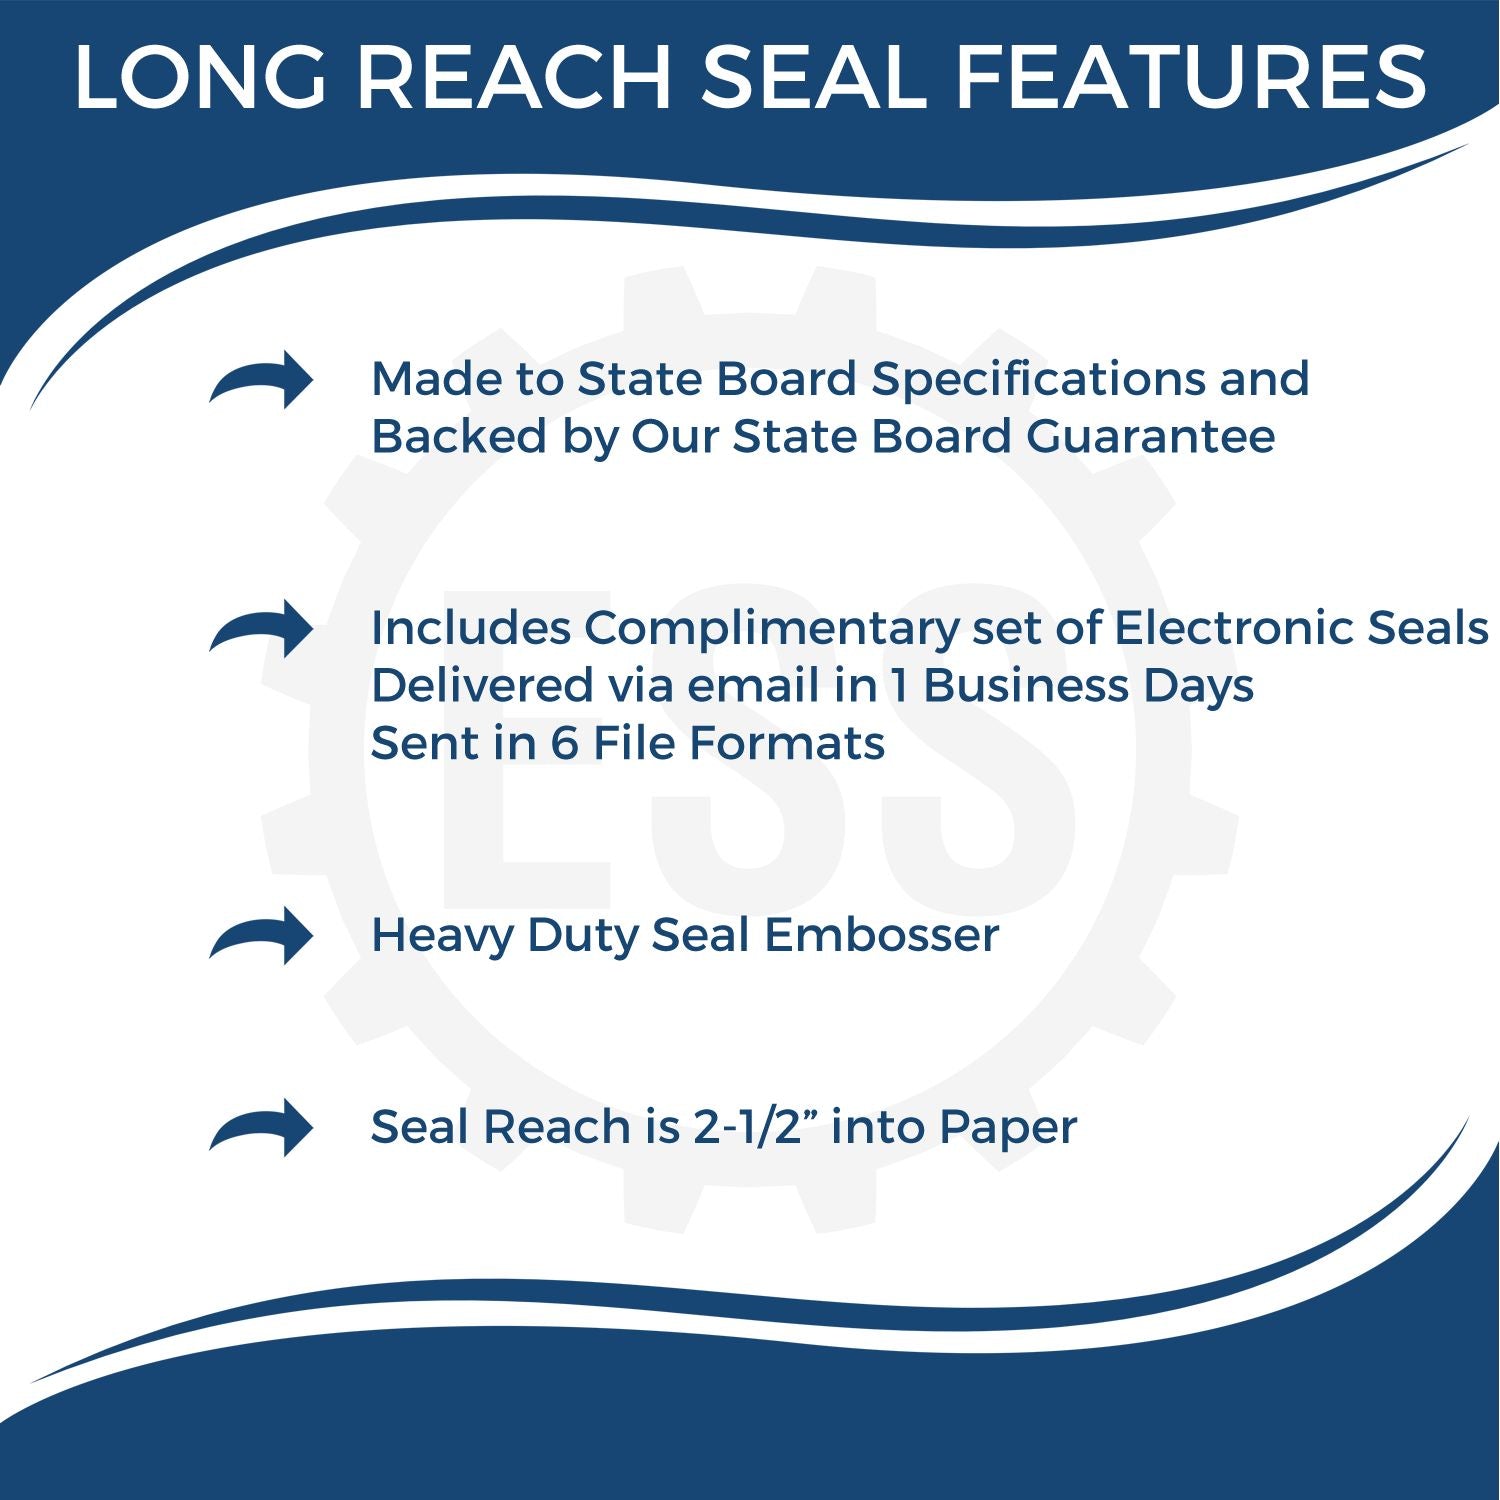 The main image for the Long Reach California PE Seal depicting a sample of the imprint and electronic files